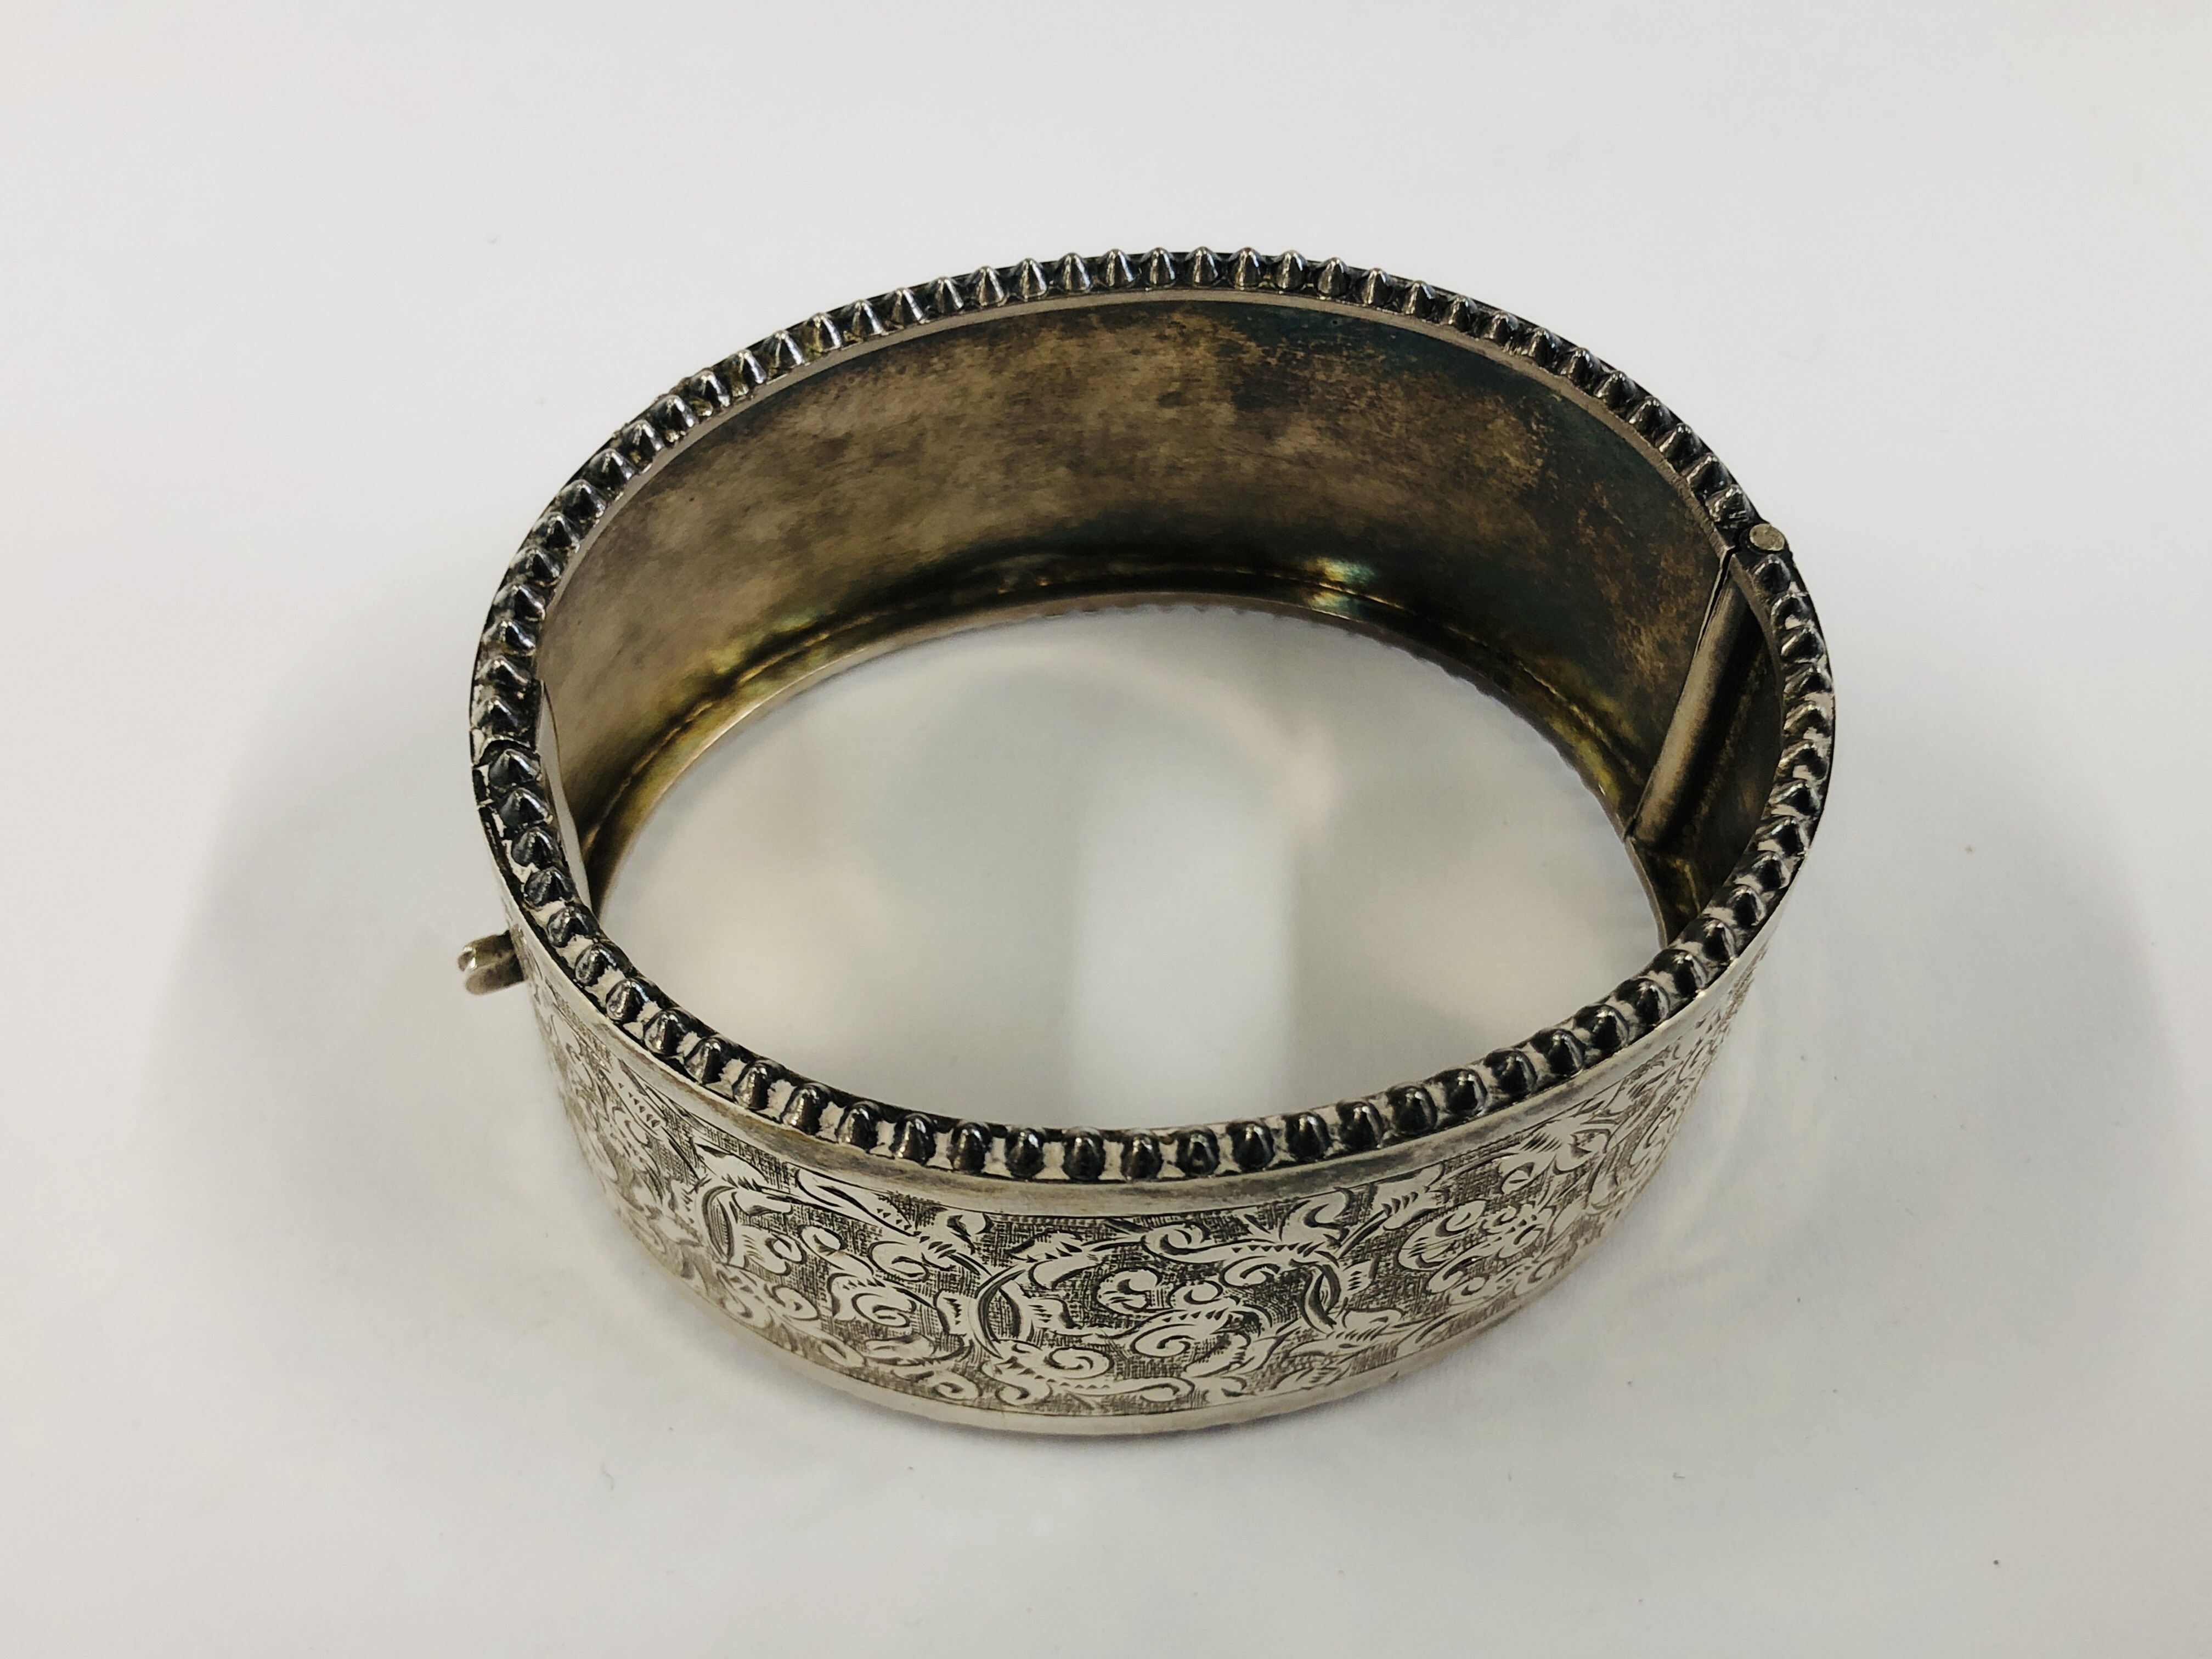 A VINTAGE WHITE METAL ENGRAVED HINGED BANGLE IN AN ANTIQUE GREEN VELVET BOX MARKED "THE ALEX CLARK" - Image 9 of 11